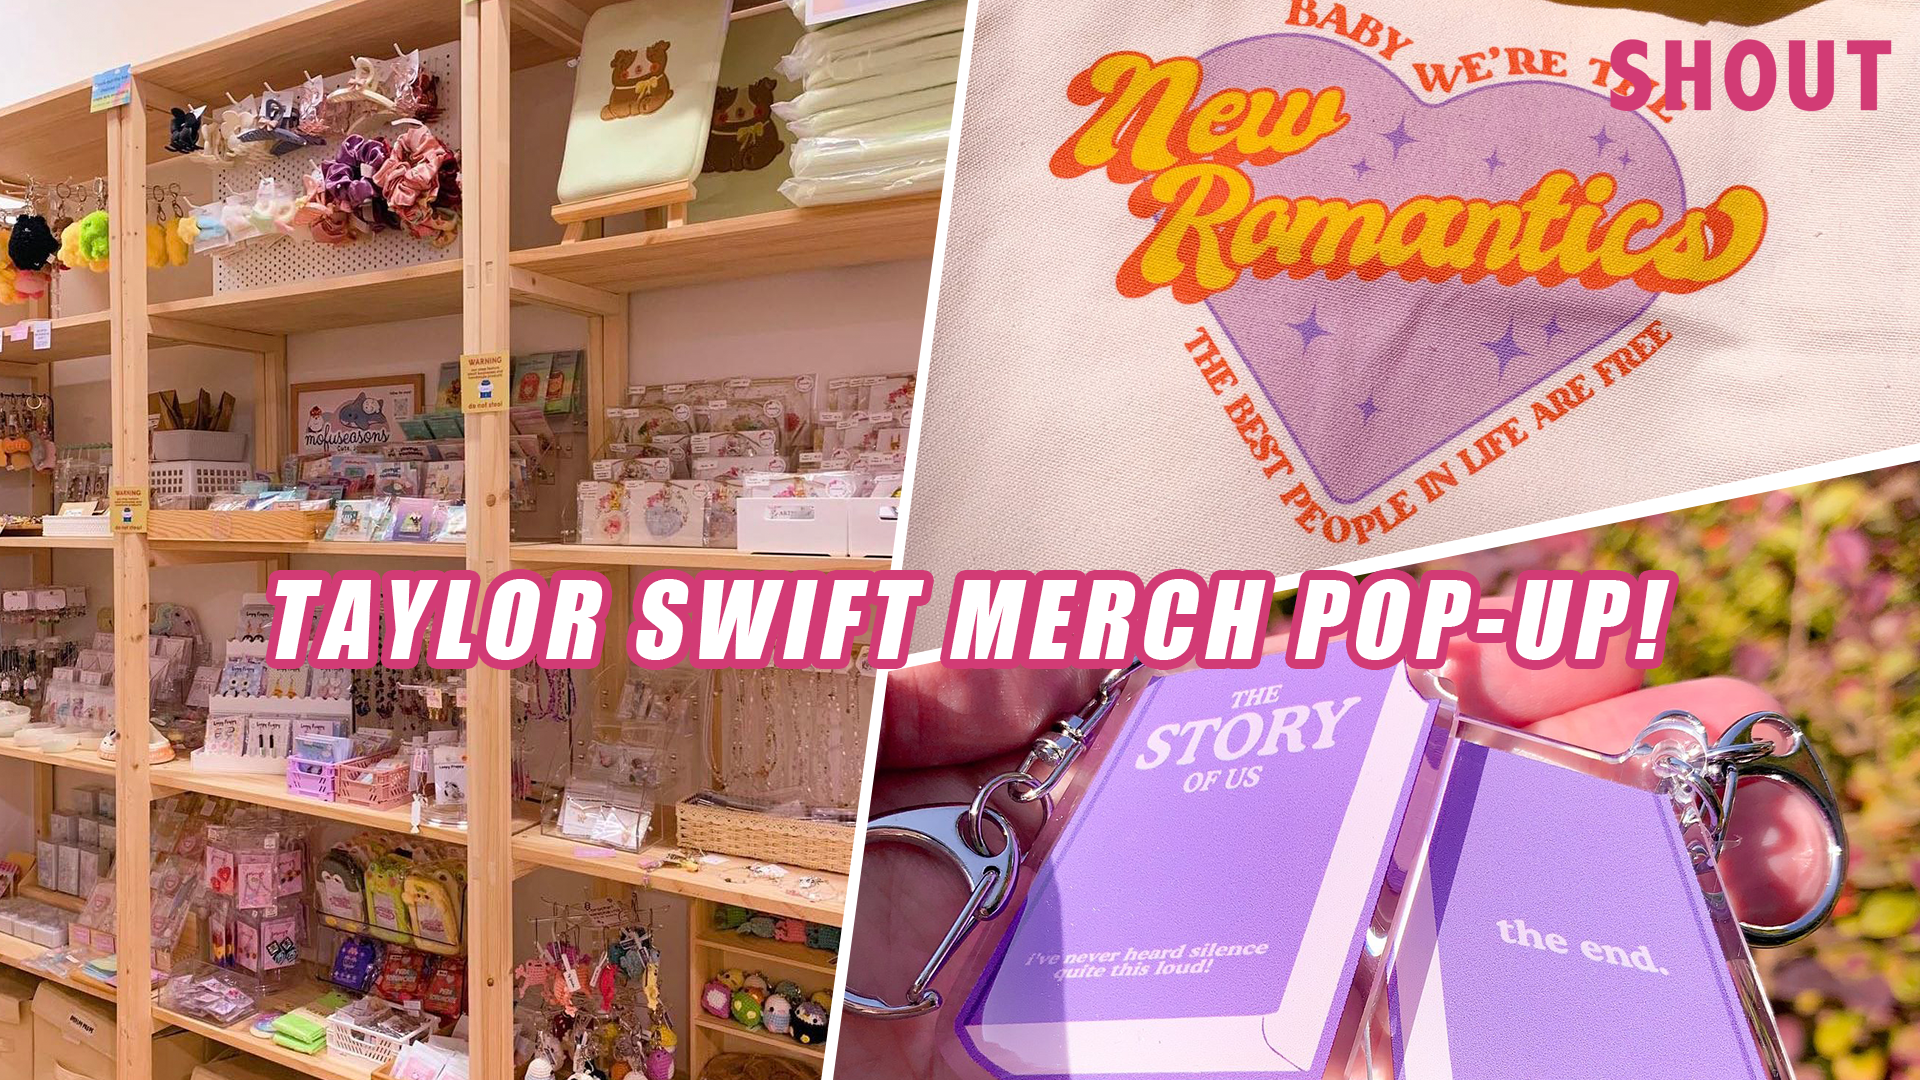 THIS POP-UP STORE IN SINGAPORE HAS EXCLUSIVE TAYLOR SWIFT MERCHANDISE TILL  30TH JUNE 2023! - Shout